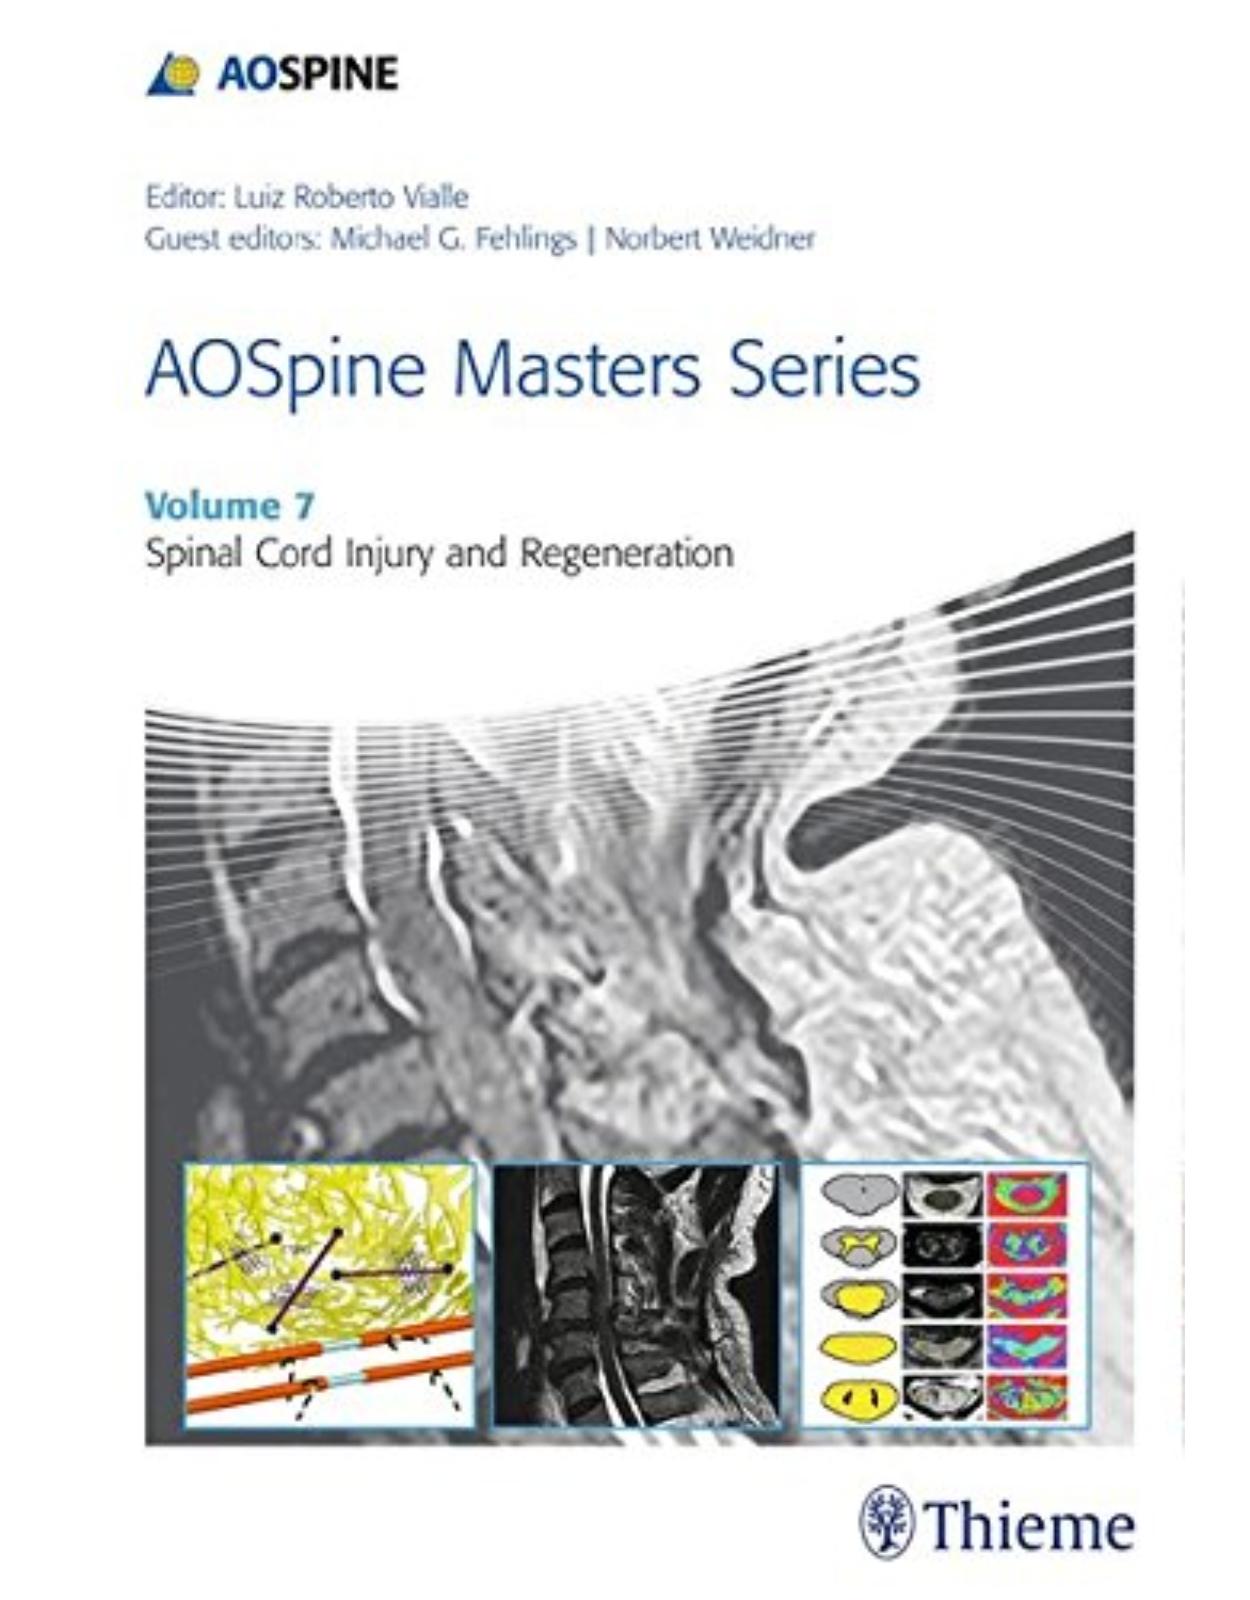  AOSpine Masters Series, Volume 7: Spinal Cord Injury and Regeneration